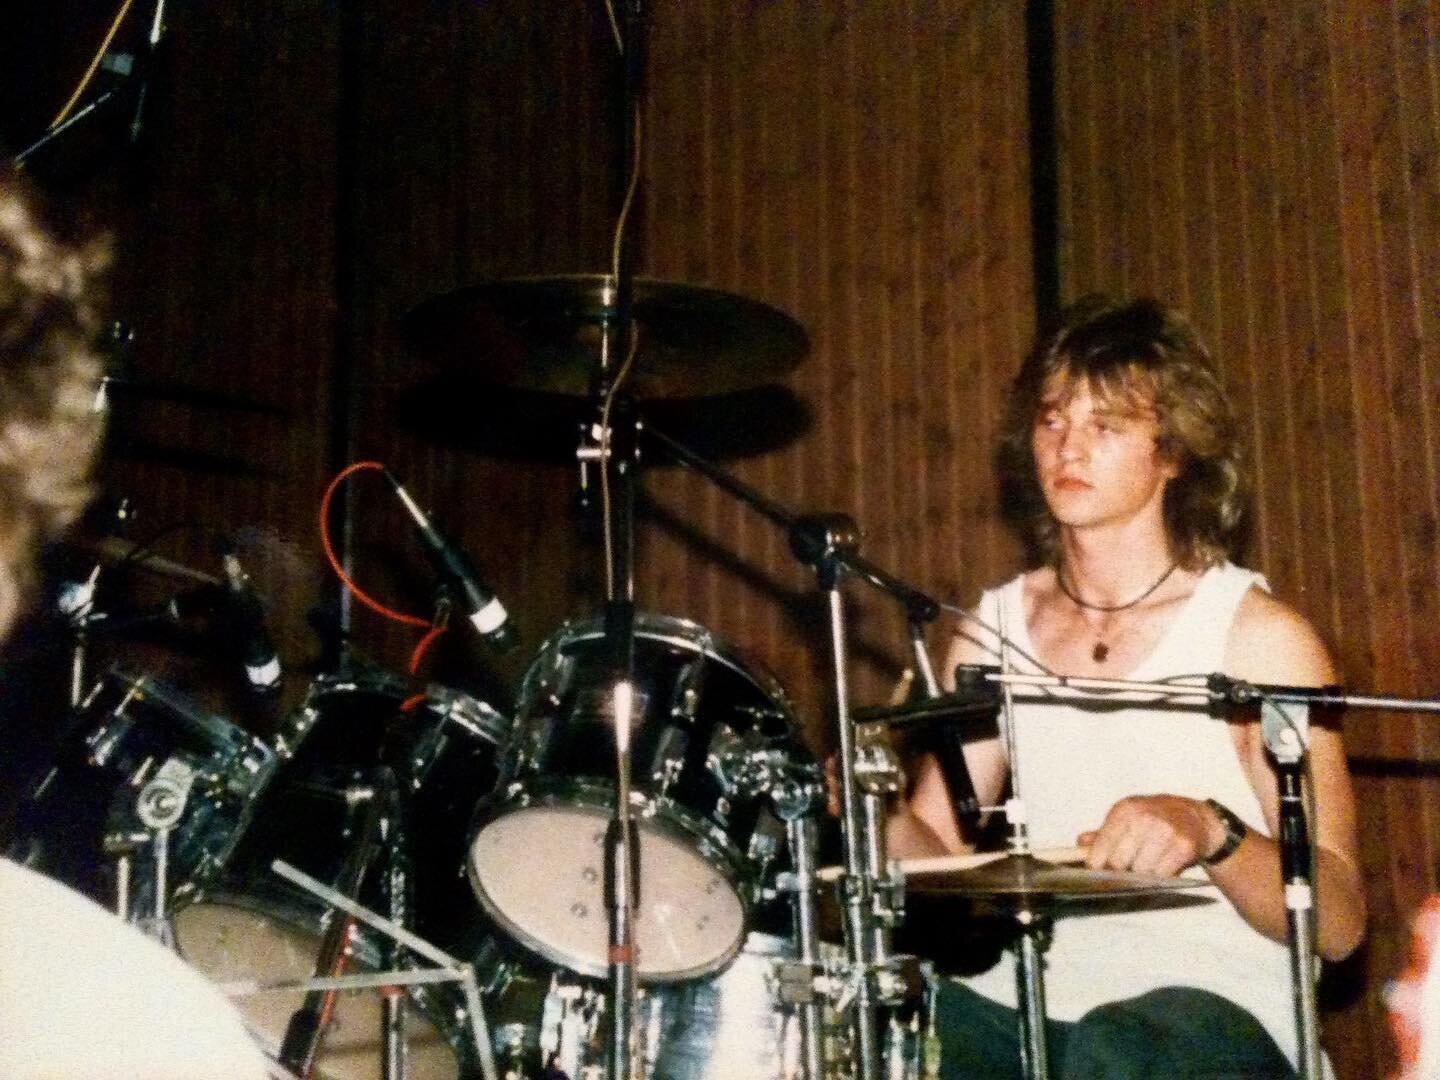 from one of my very first gigs in the 80&lsquo;s. A lot has changed since then but that sleepy face when I&lsquo;m playing is still the same today 😀😴 #blastfromthepast #drumsforlife #playdrums #pearldrums